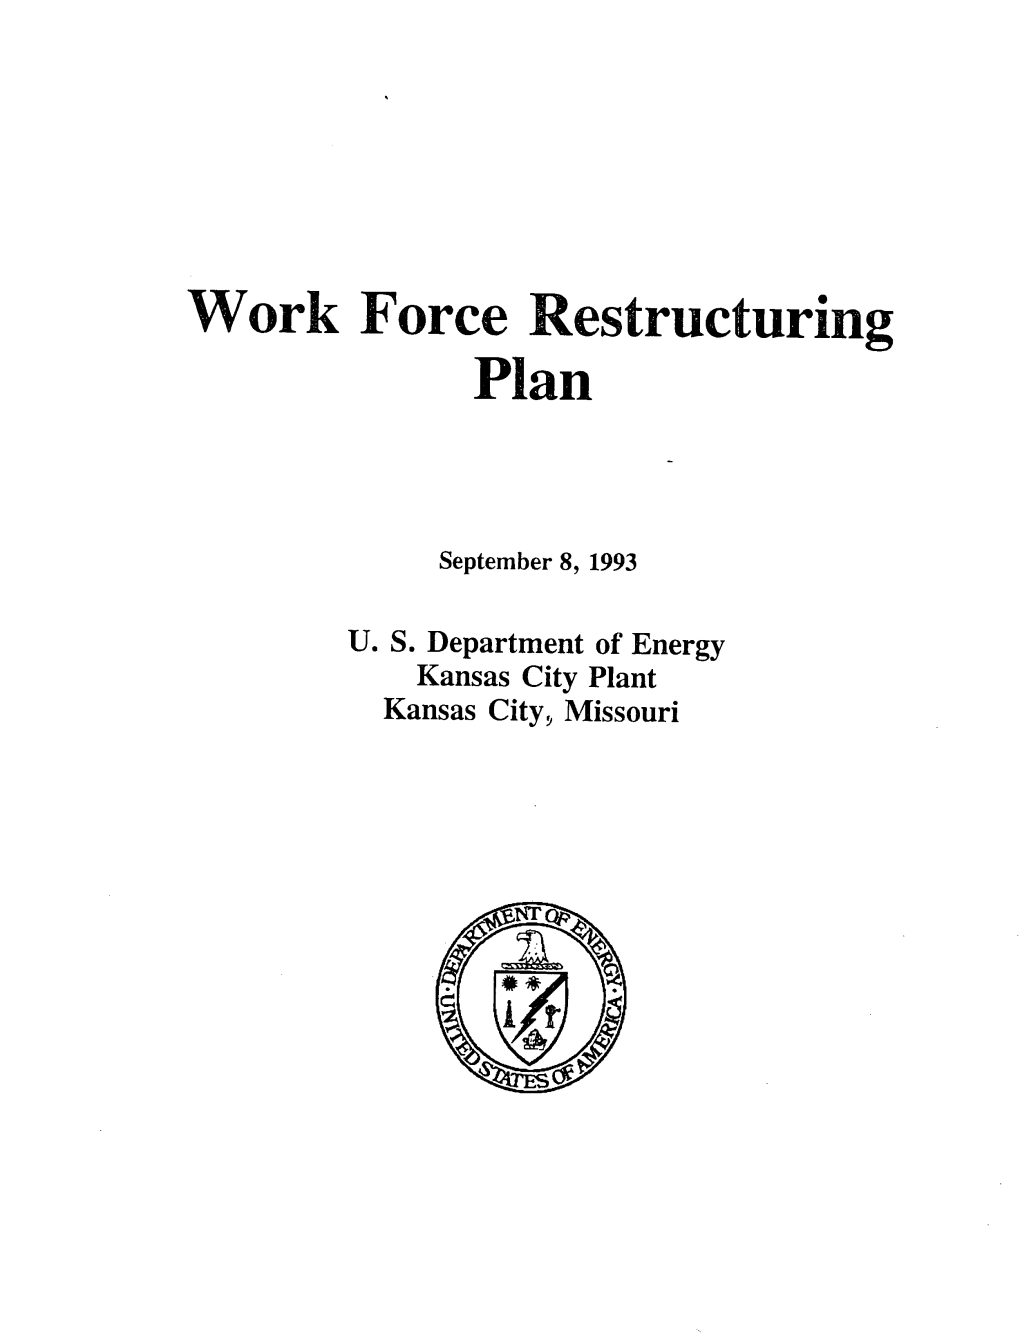 Work Force Restructuring Plan